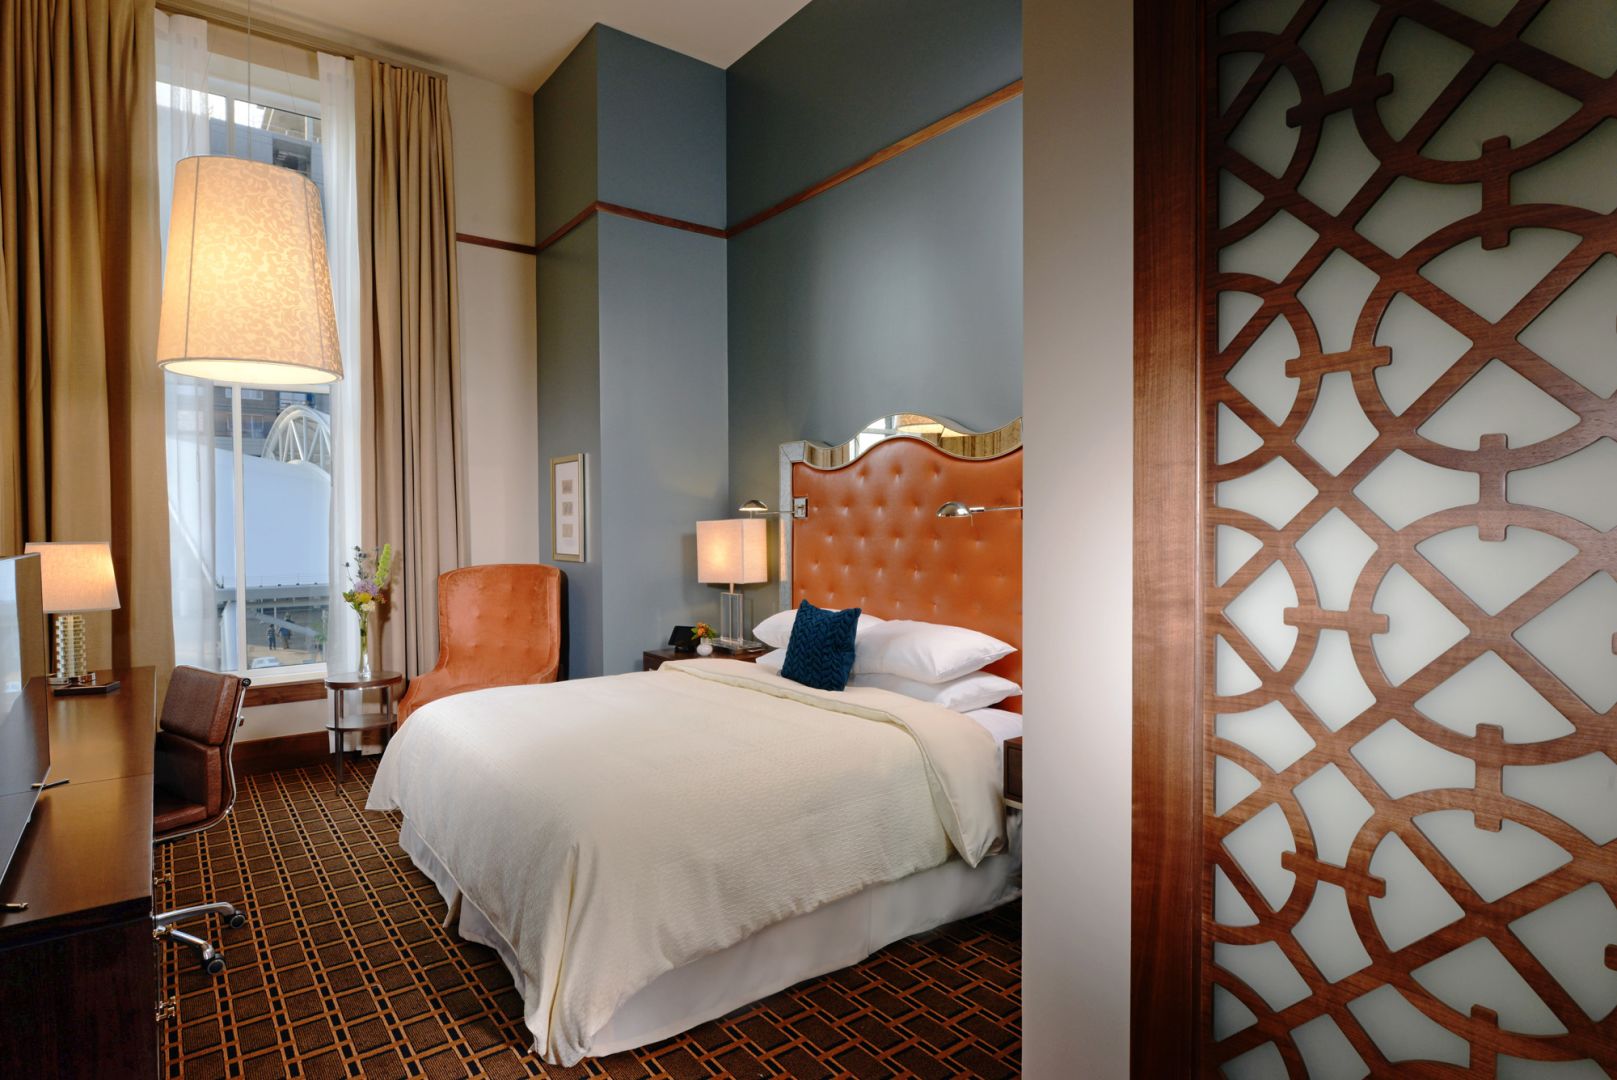 guest room at the crawford hotel union station, a mcwhinney hotel development in denver, co